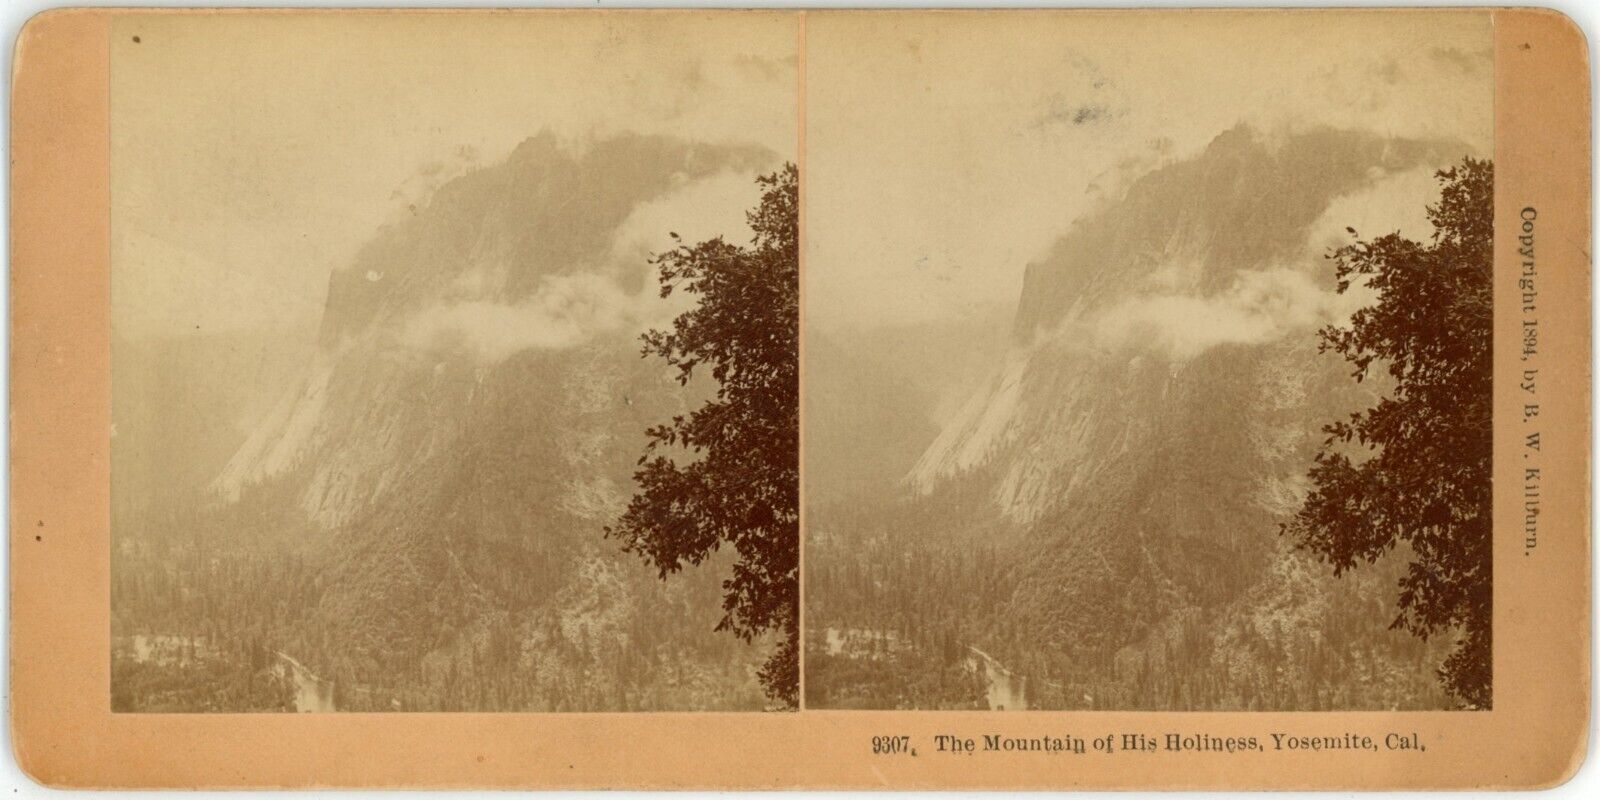 1894 Real Photo Stereoview Card 9307 The Mountain of His Holiness Yosemite, CA